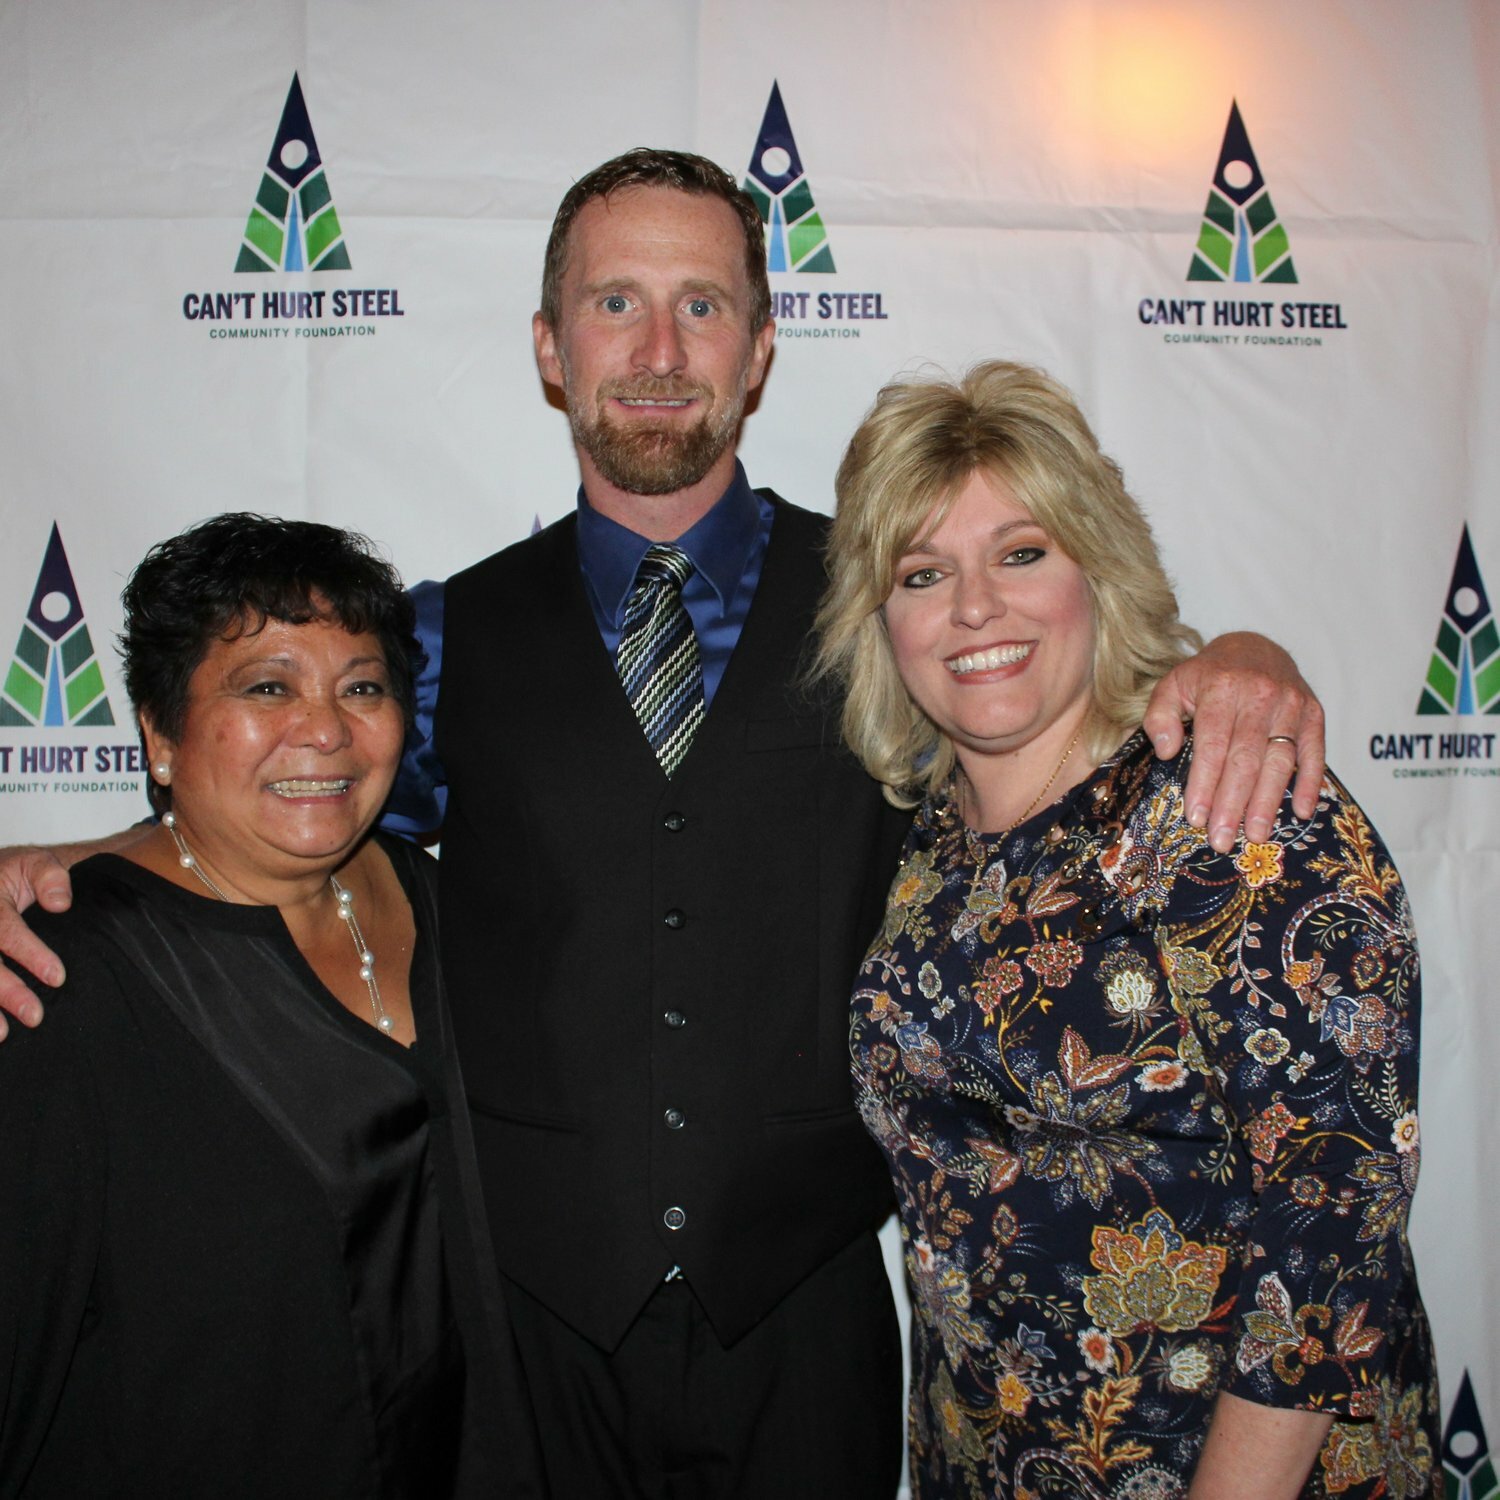 Honored at a Can’t Hurt Steel Foundation gala in 2019 were Cathy Daboul, left; Ryan Gillespie; and Pam Kocher. The foundation was started in response to a question repeatedly asked by J.J. Hanson as he reached the end stage of his battle with cancer: “How do we help people?”..This story was told by his wife, Kristen Hanson, who spoke of her late husband as a man who loved his community and who never gave up.